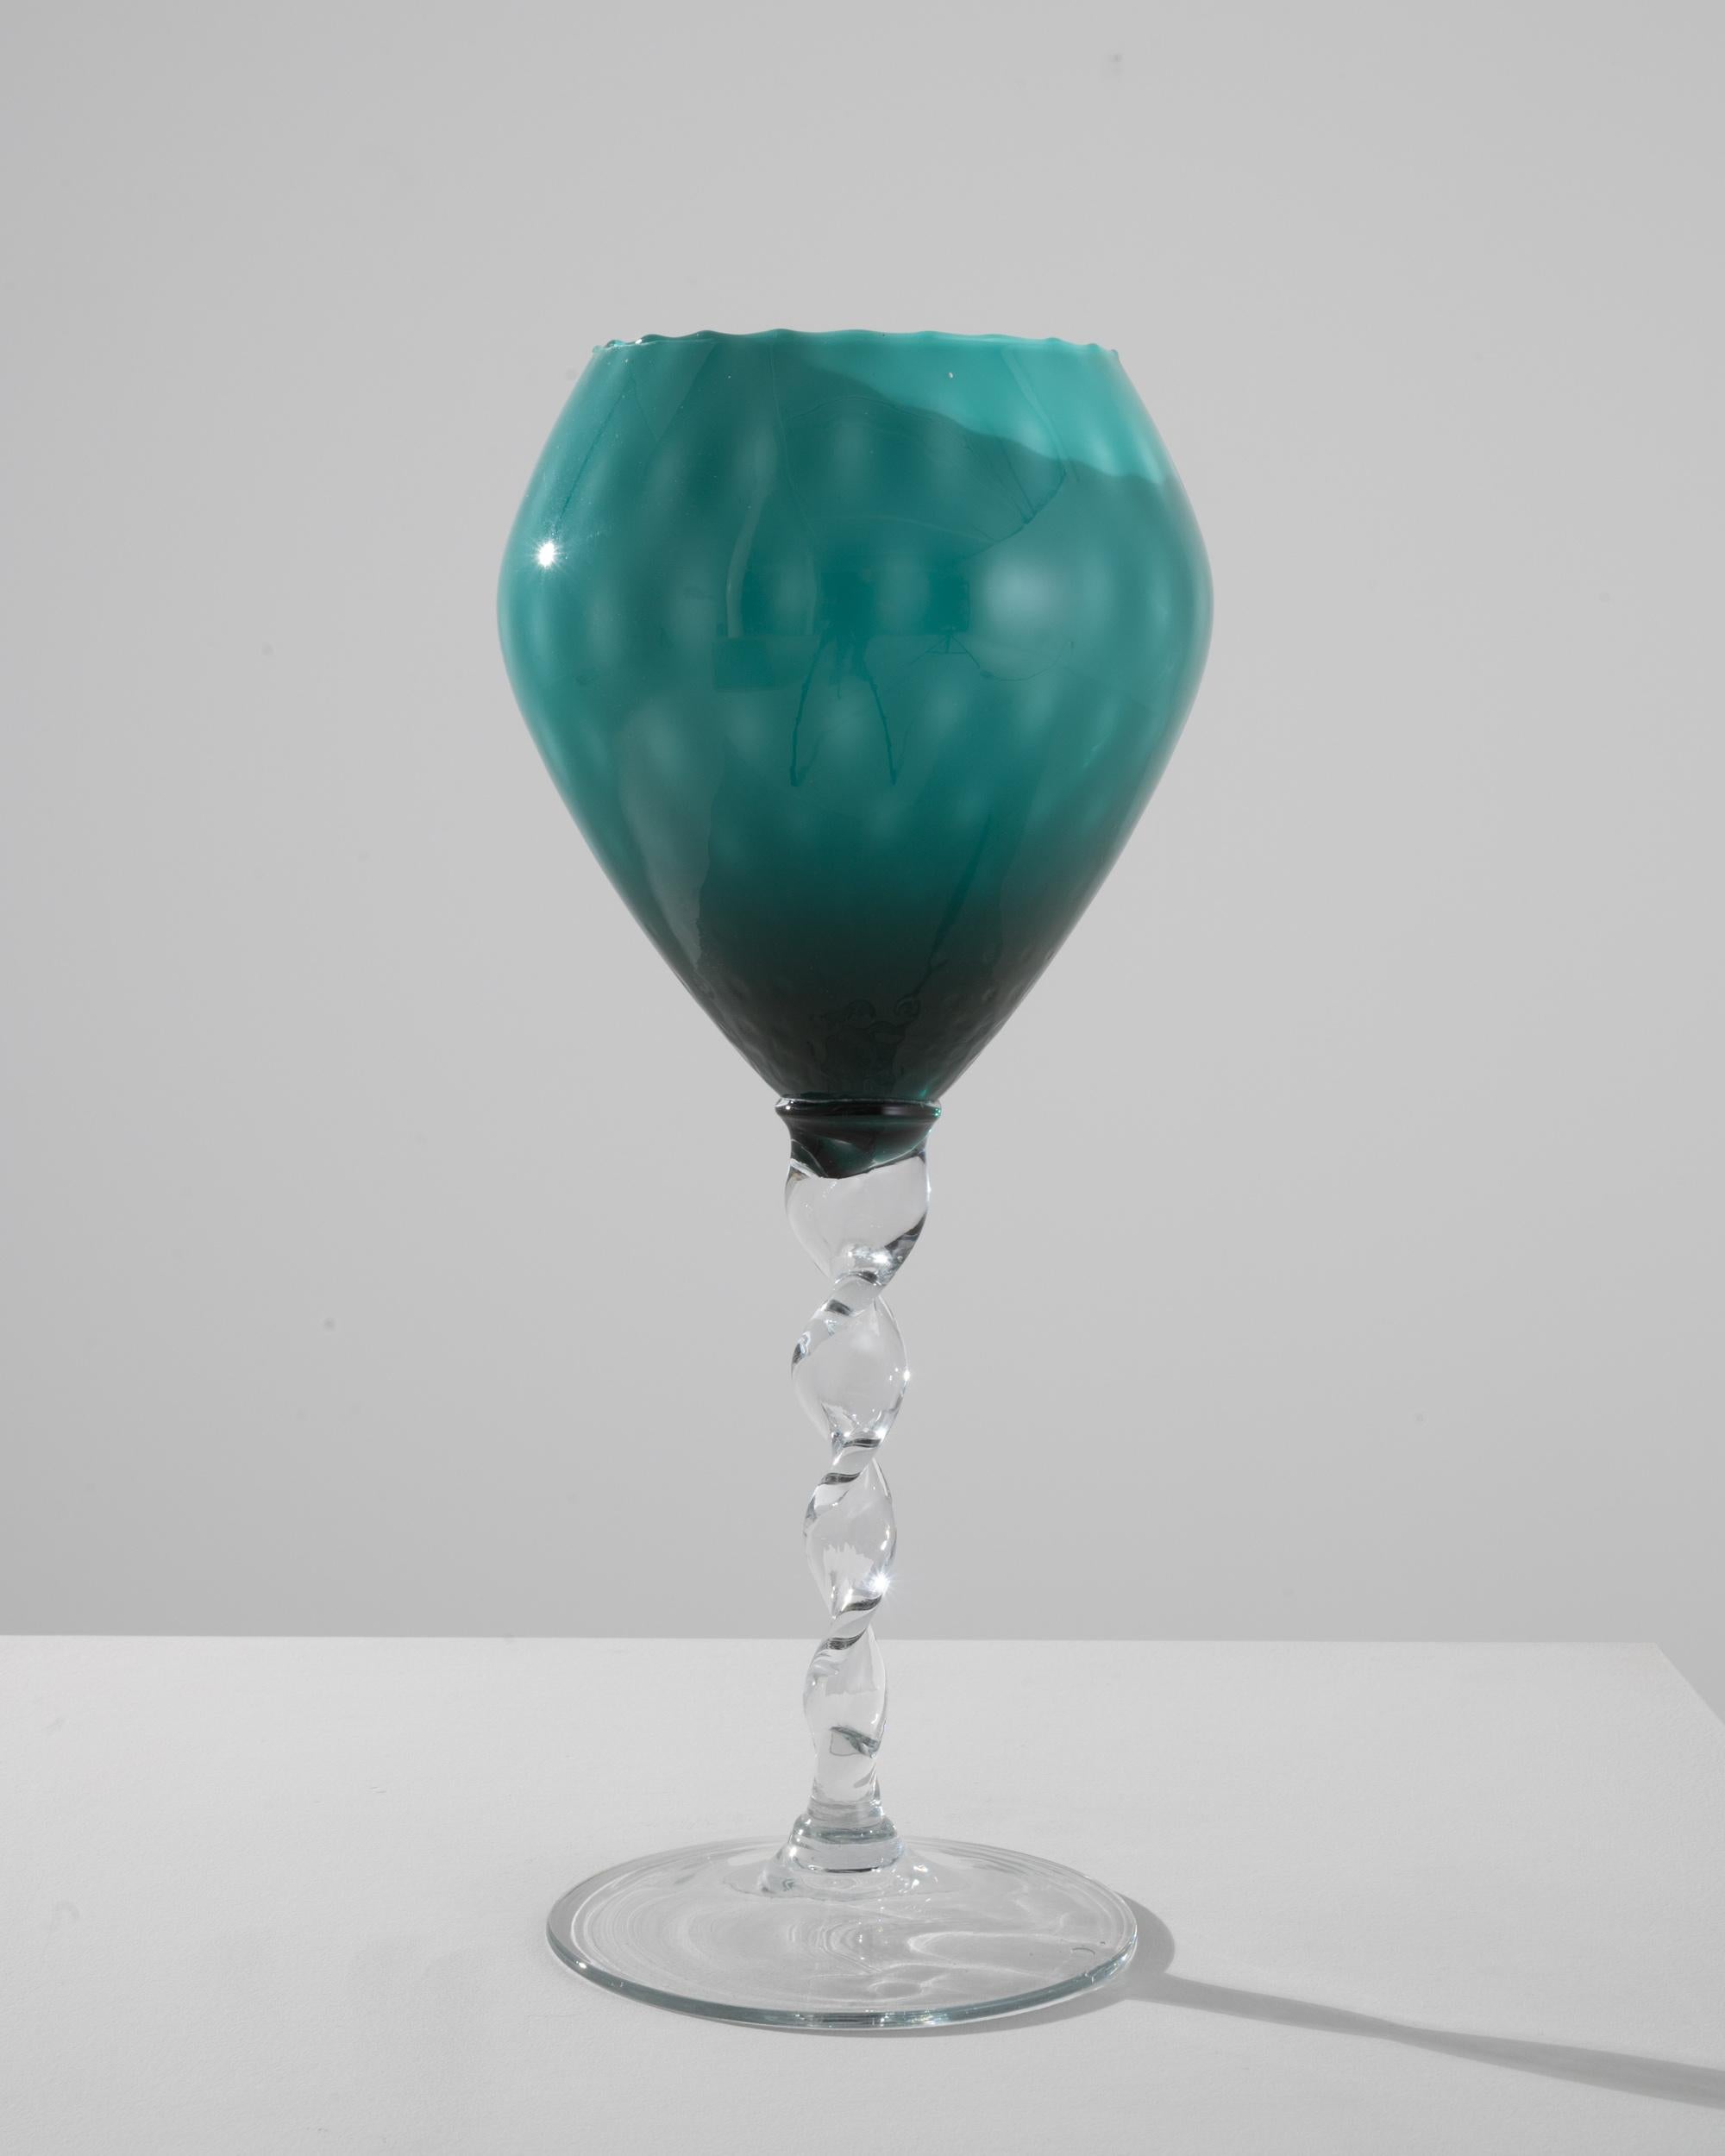 1960s Italian Green Glass Goblet In Good Condition For Sale In High Point, NC